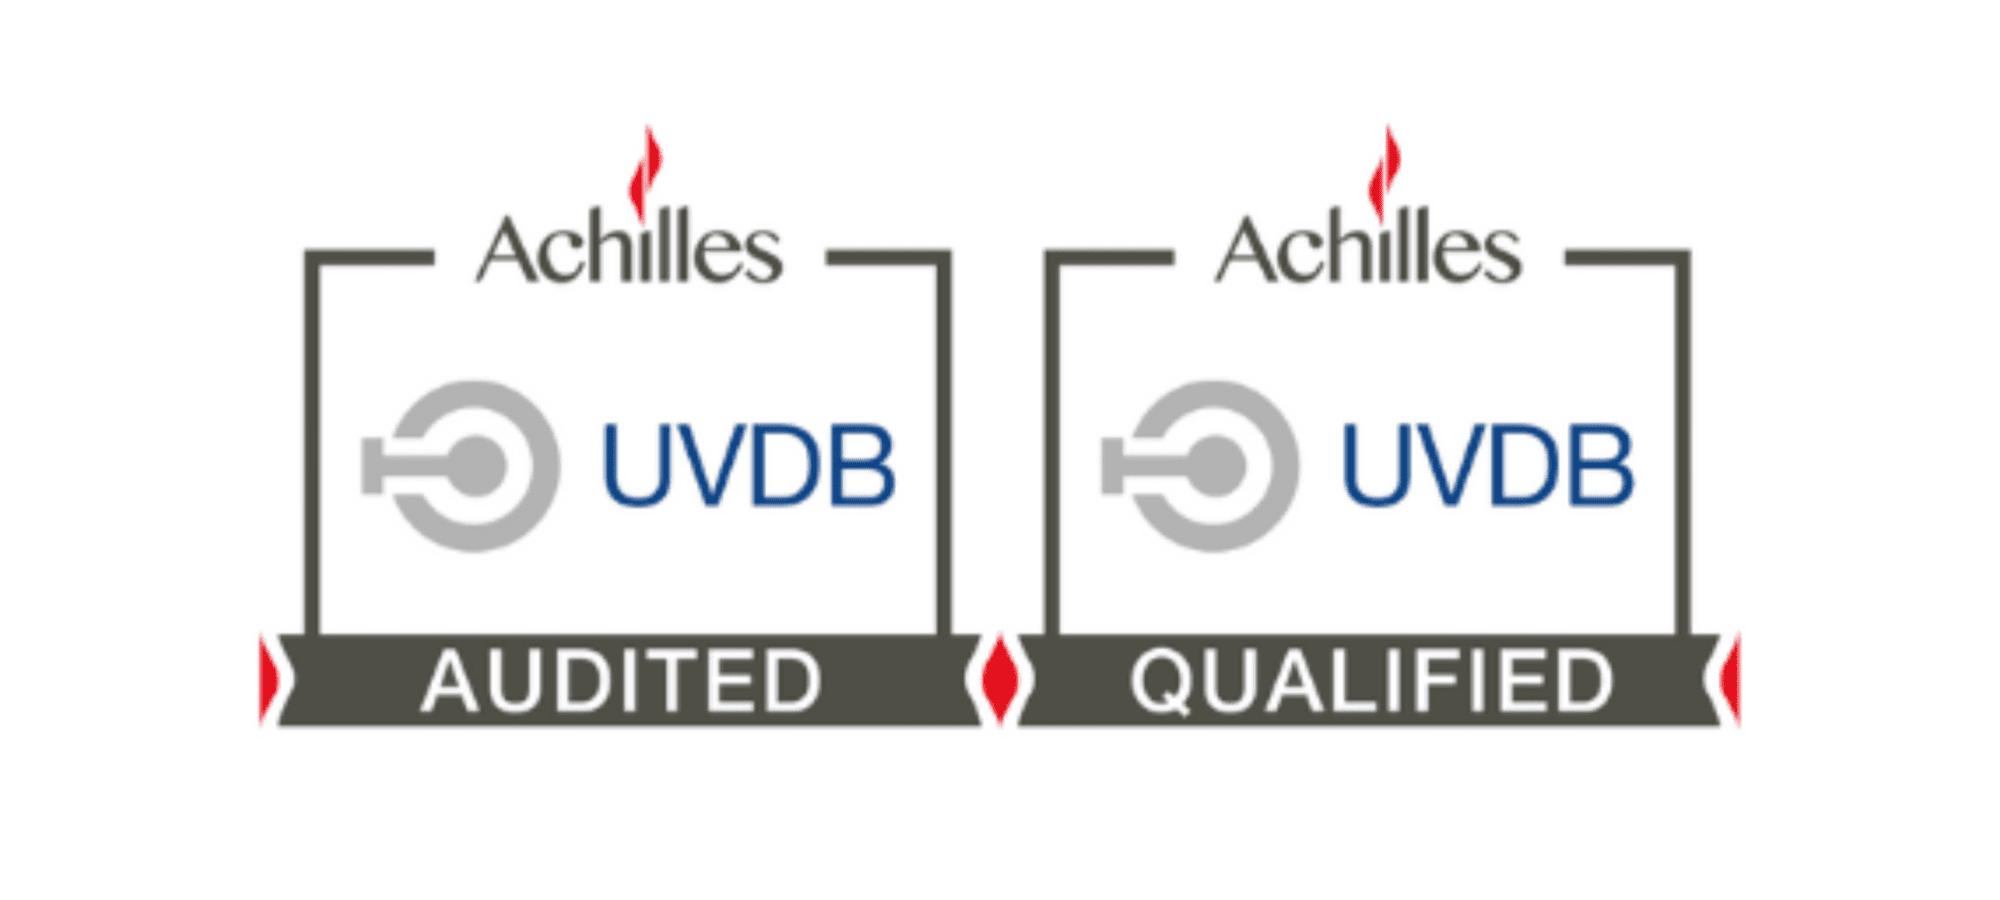 Achilles UVDB Verify Category C and NCE Utilities